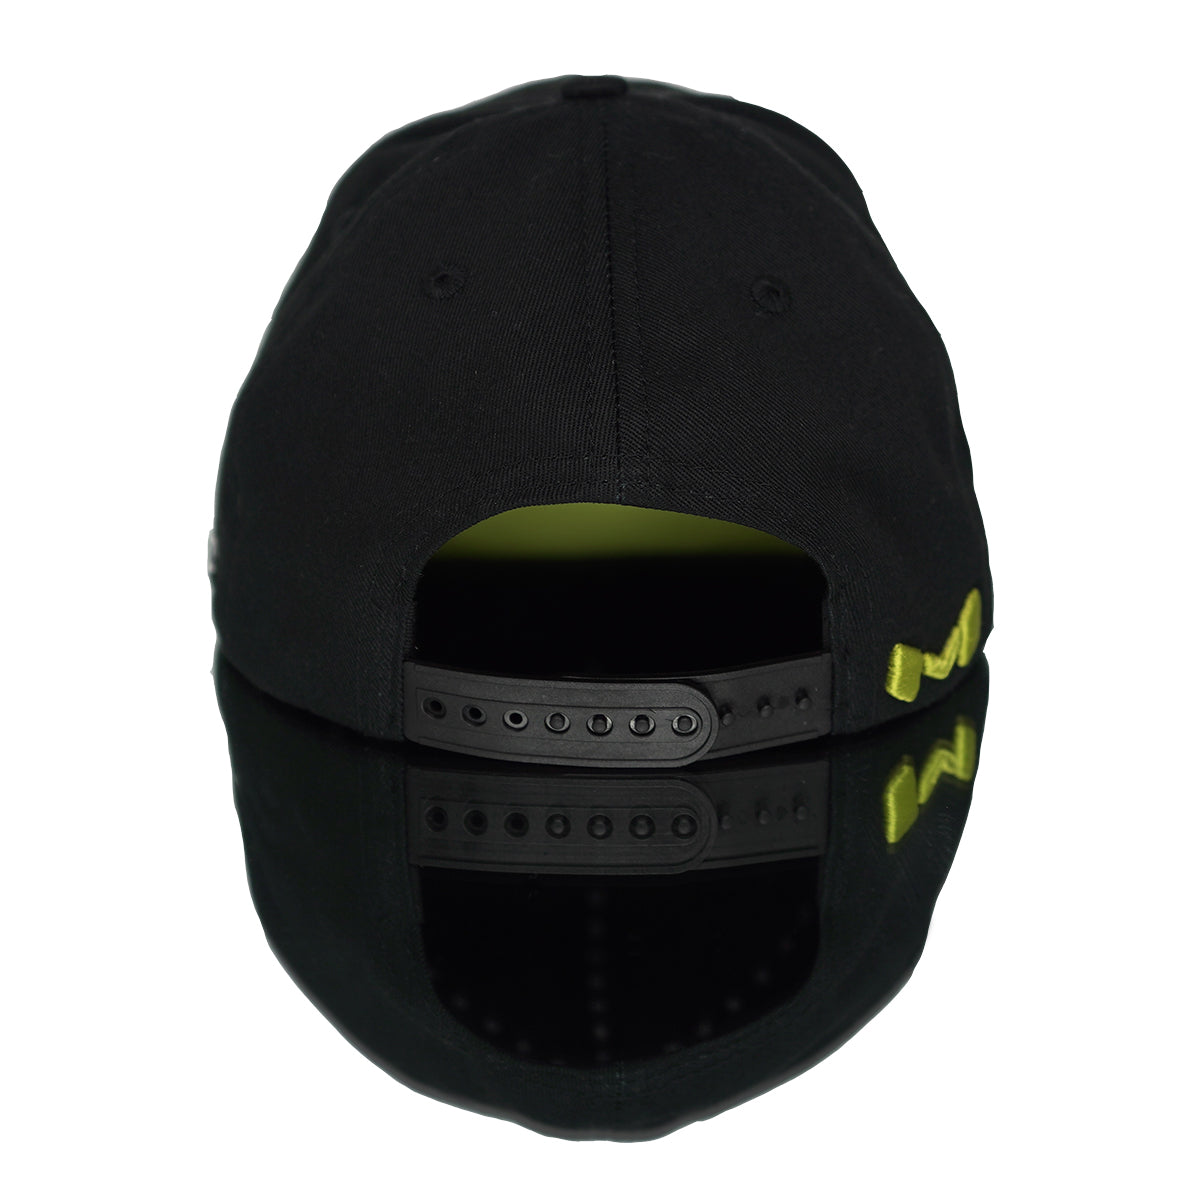 Alegra Motorsports team hat in black with neon yellow raised embroidery and snapback adjustable closure